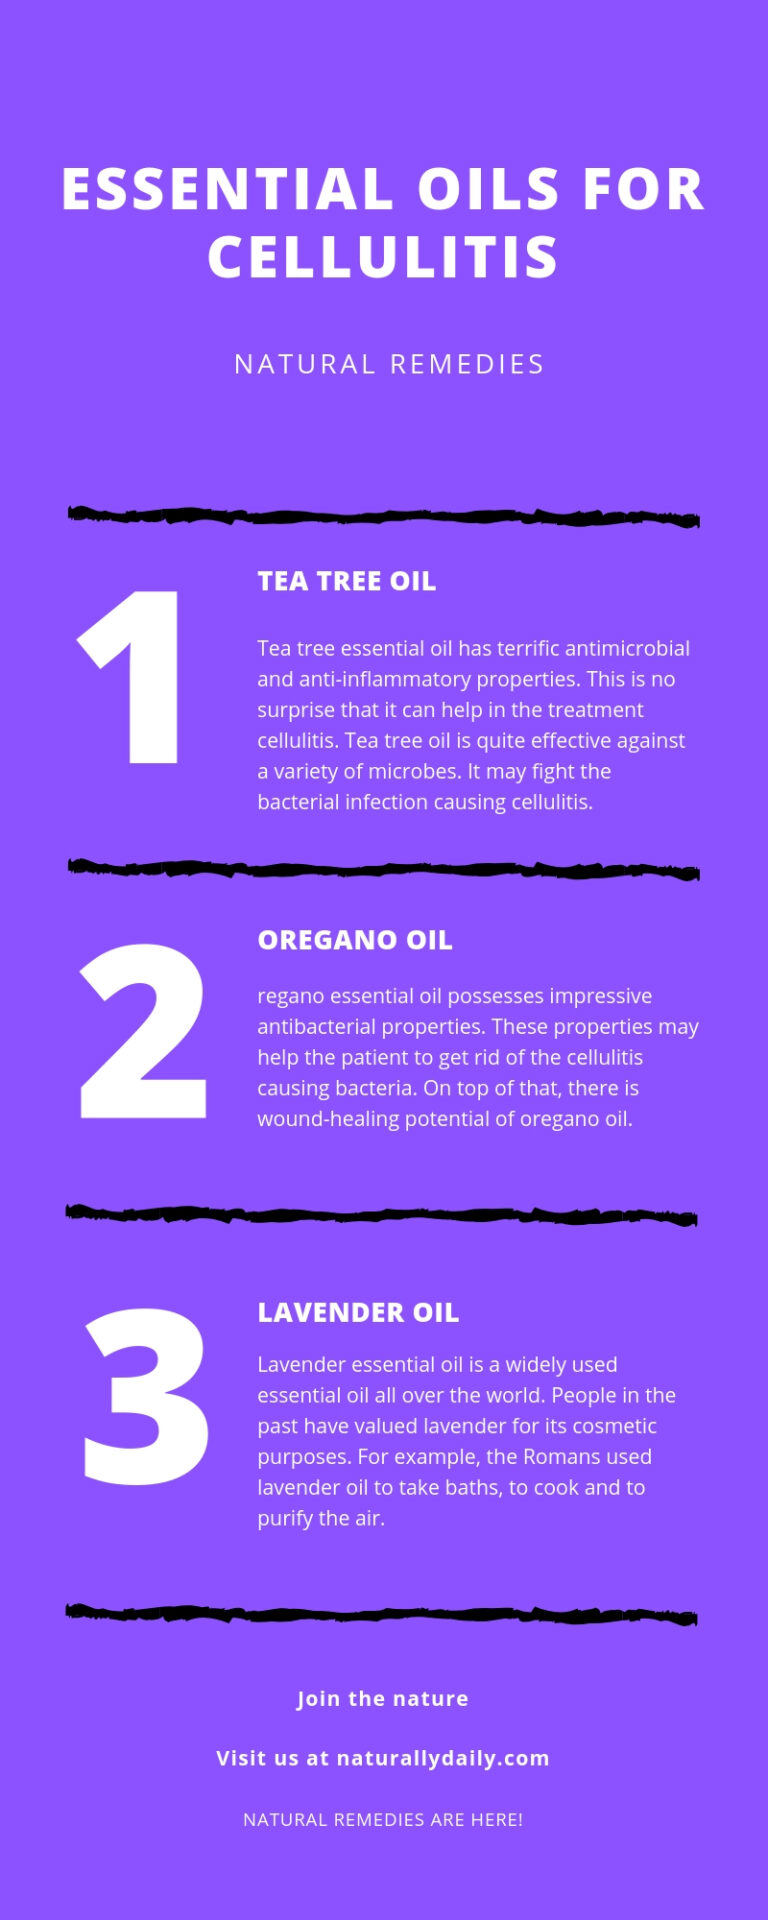 Essential Oils for Cellulitis: Benefits & How to Use Them